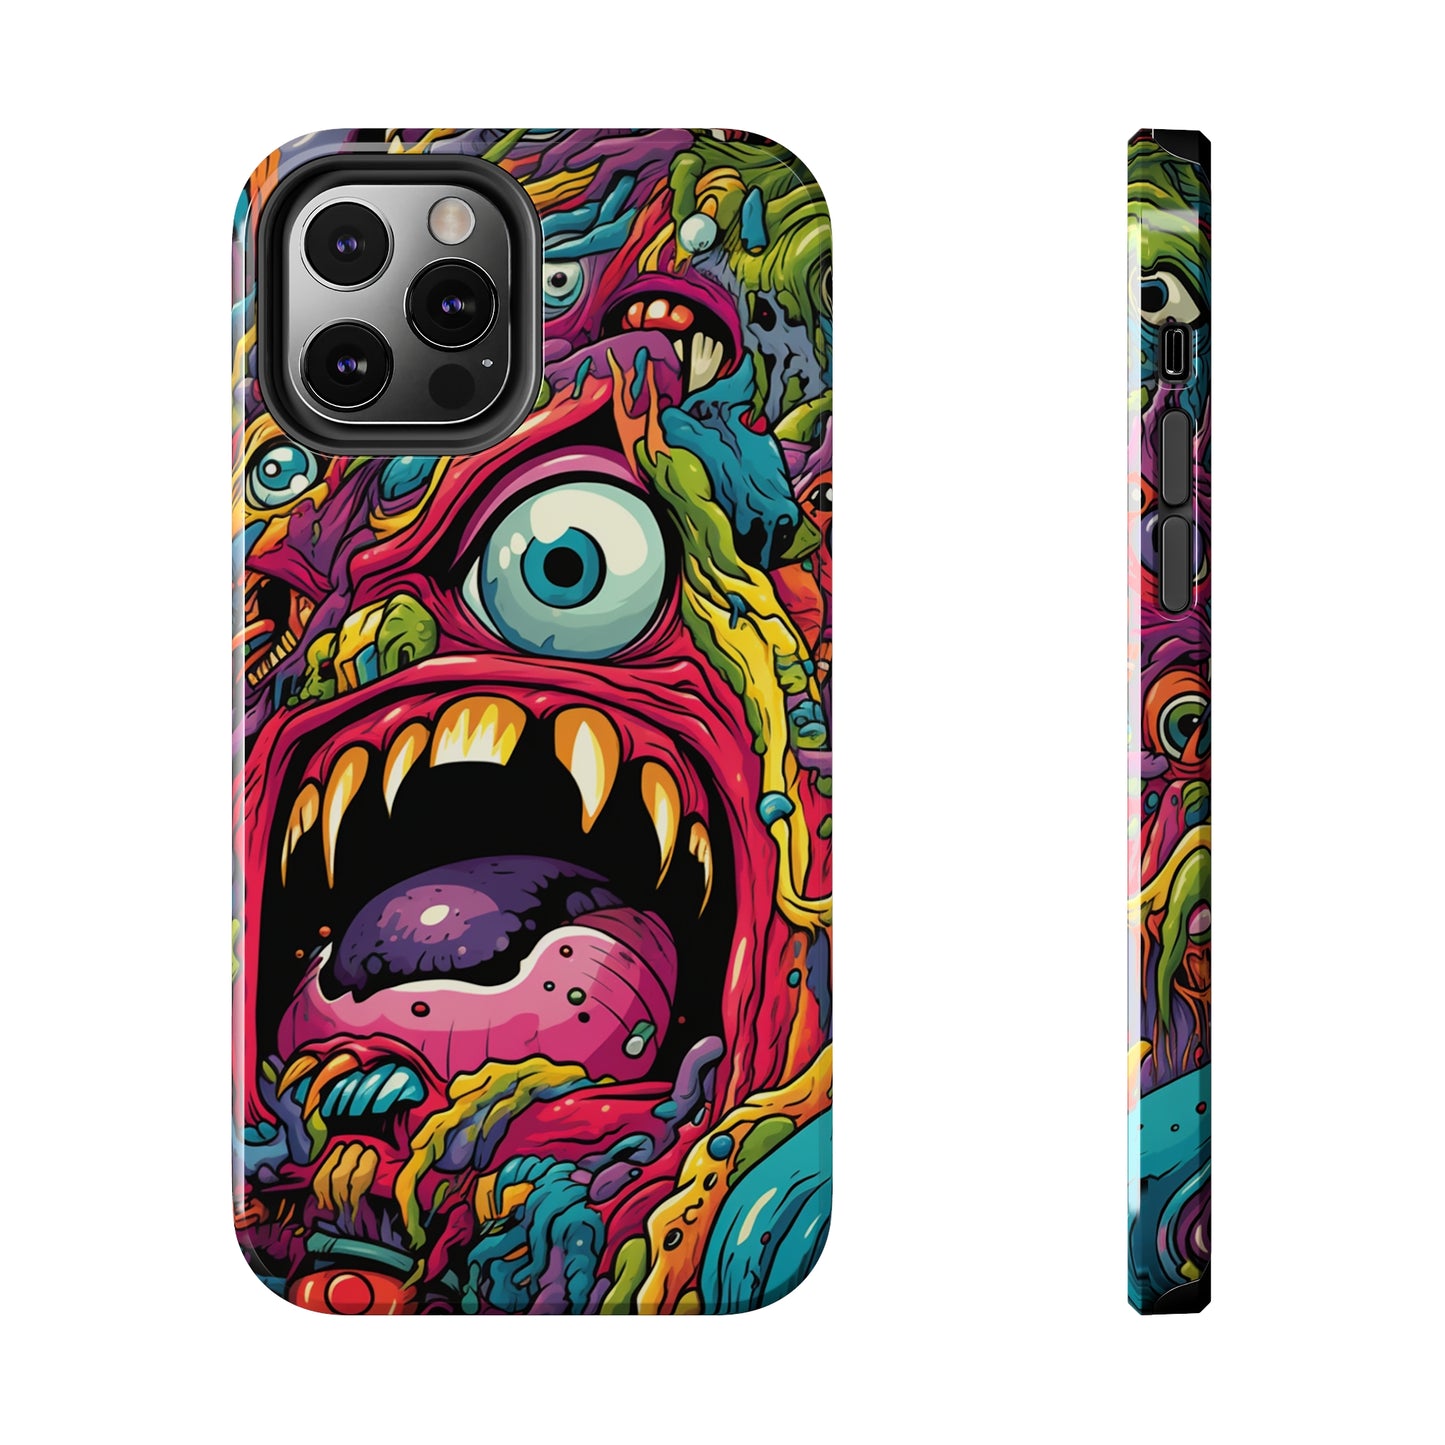 Vibrant tales of dreams and nightmares iPhone case